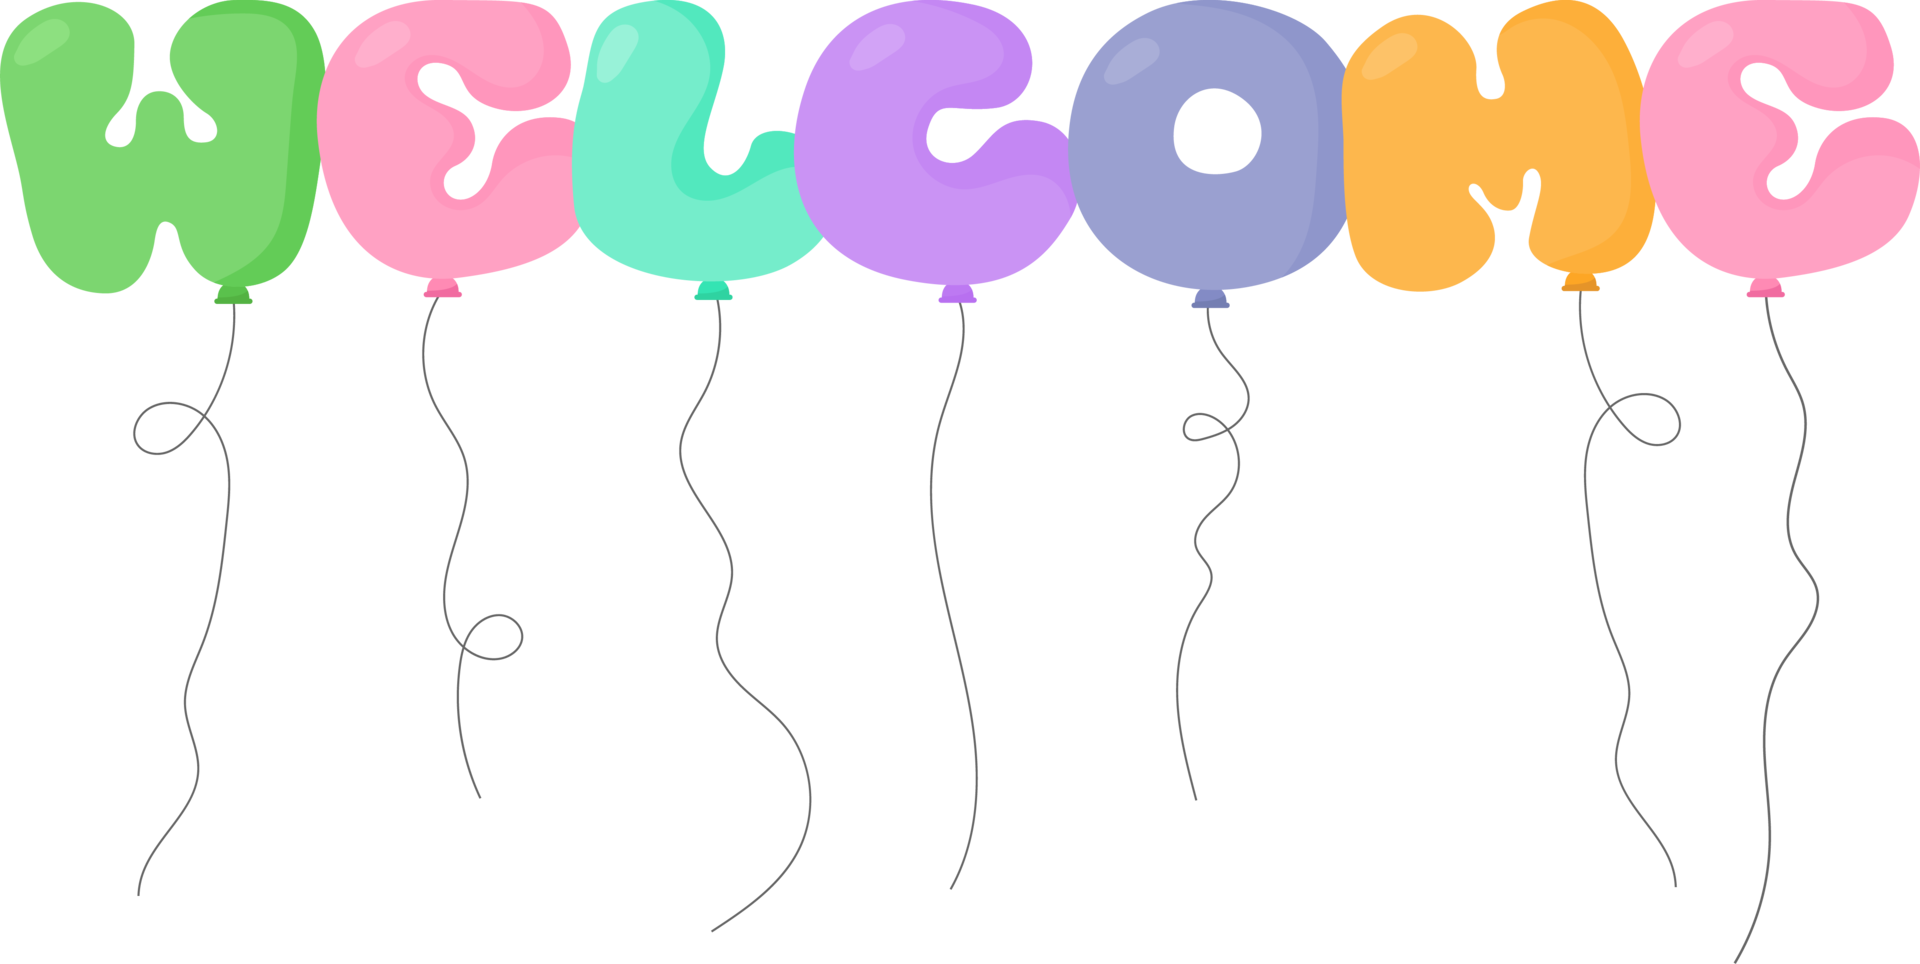 Balloon text in cartoon style png